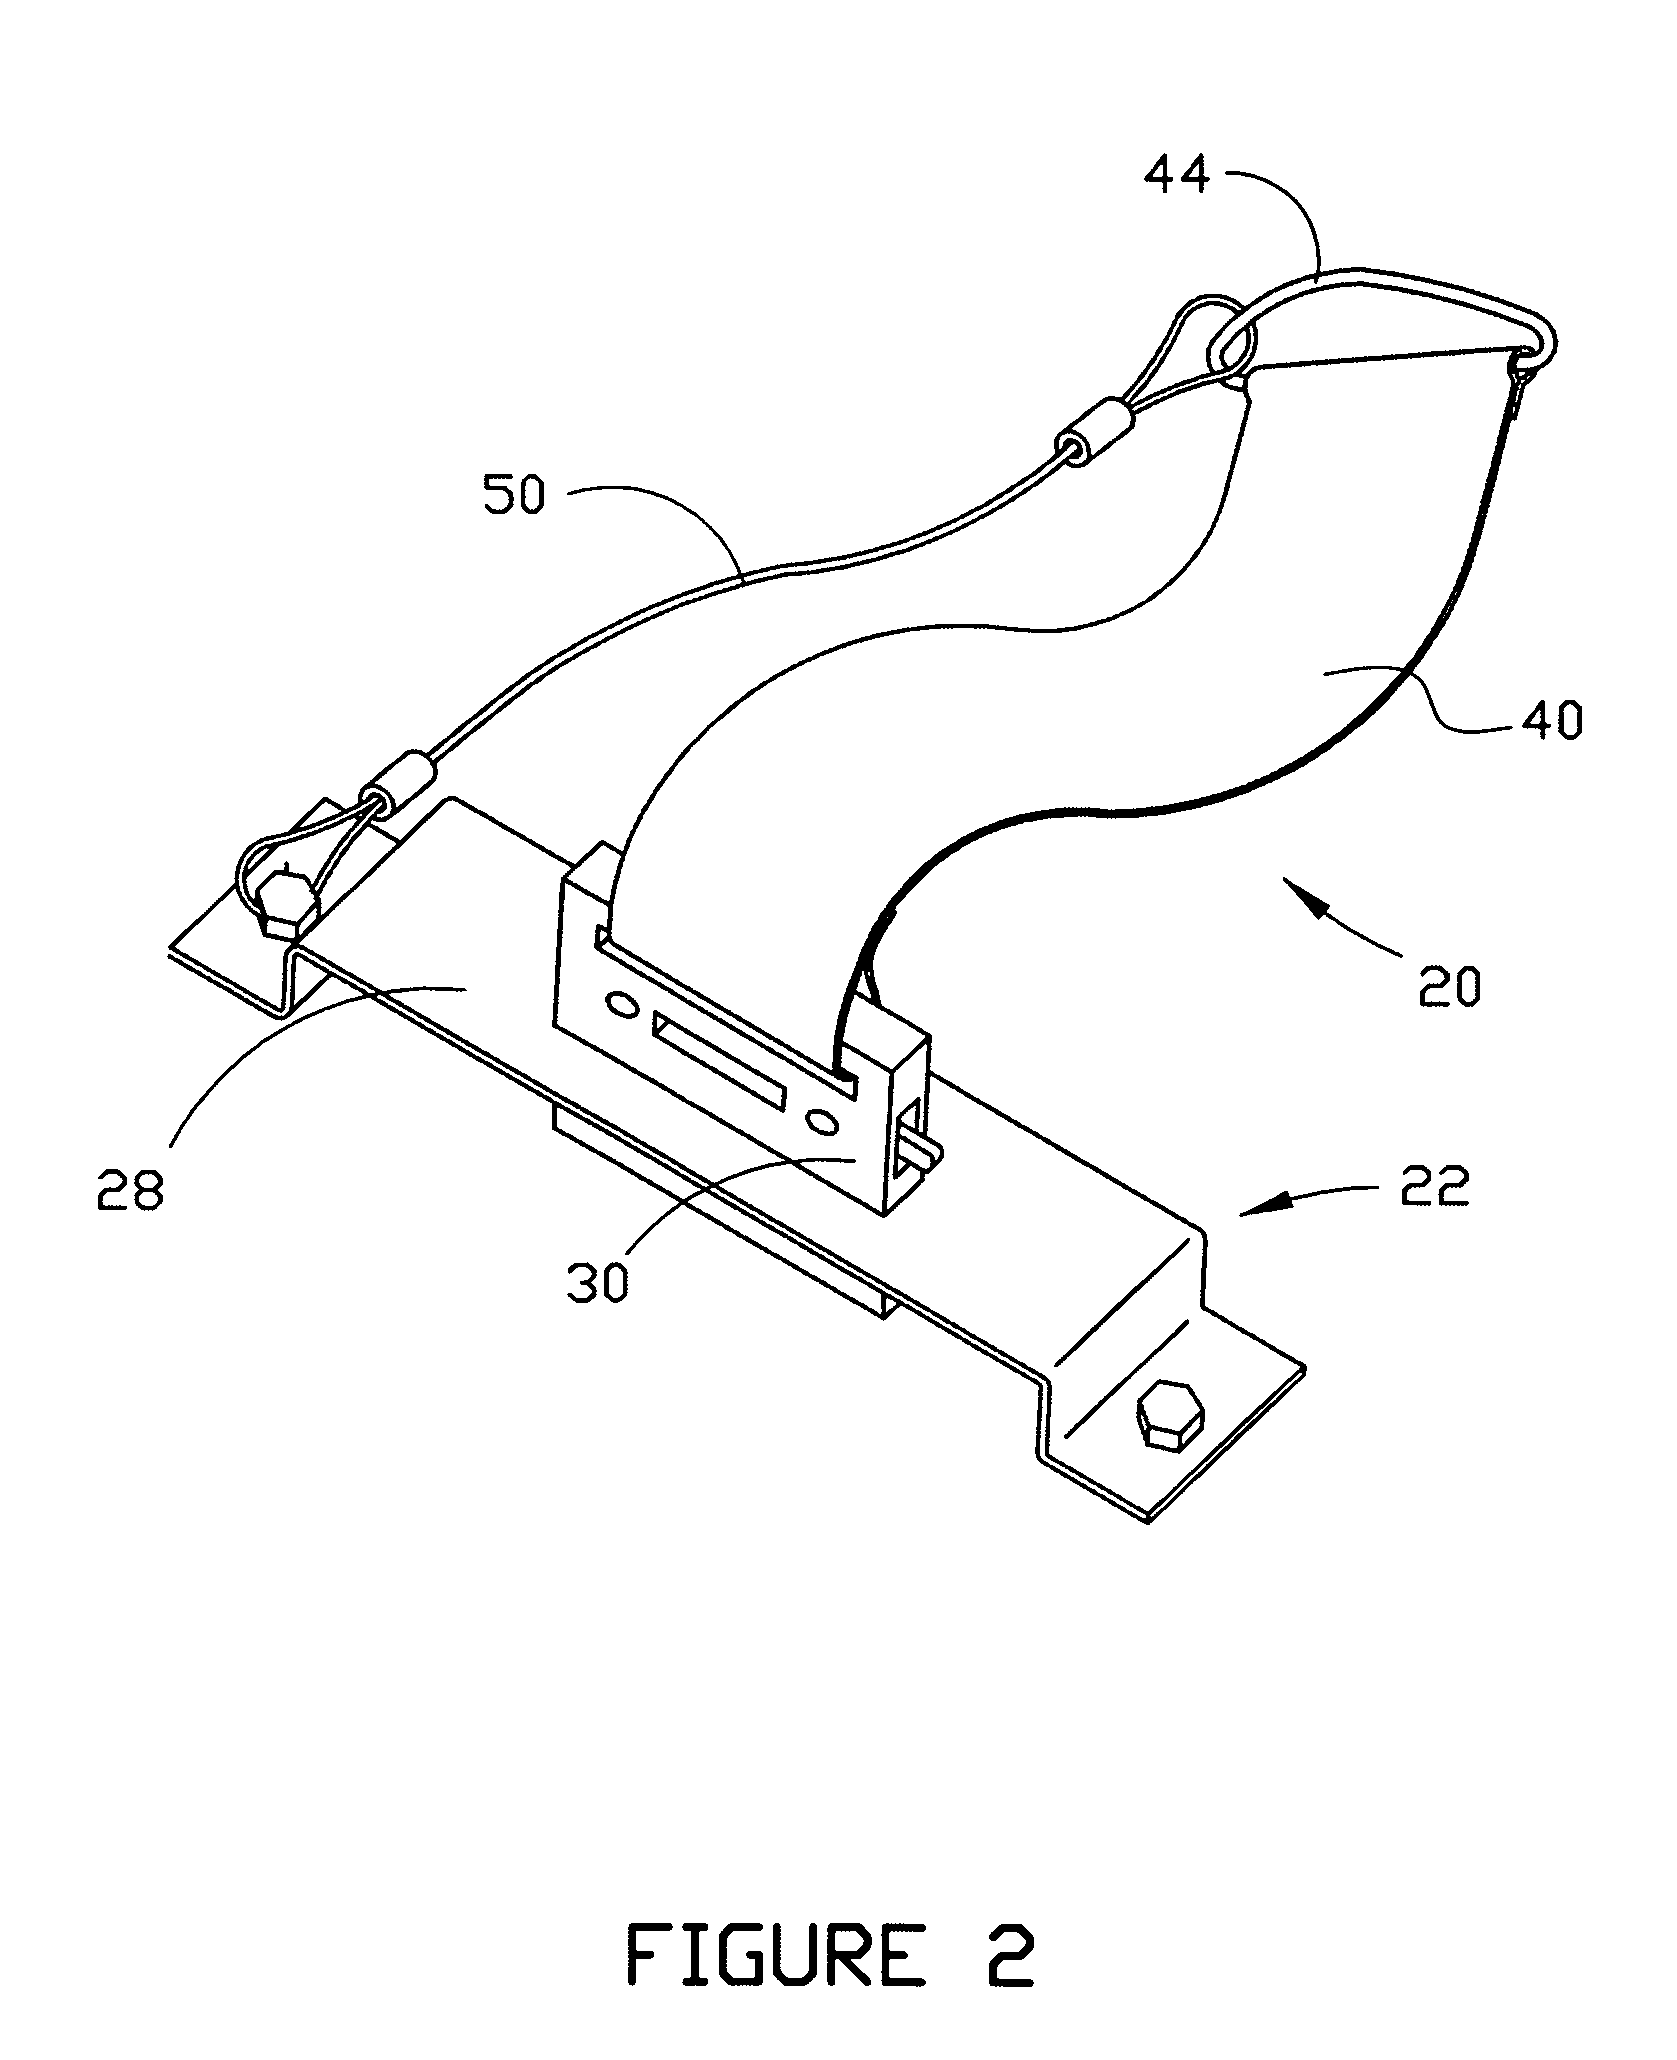 Apparatus and method for securing a pallet jack